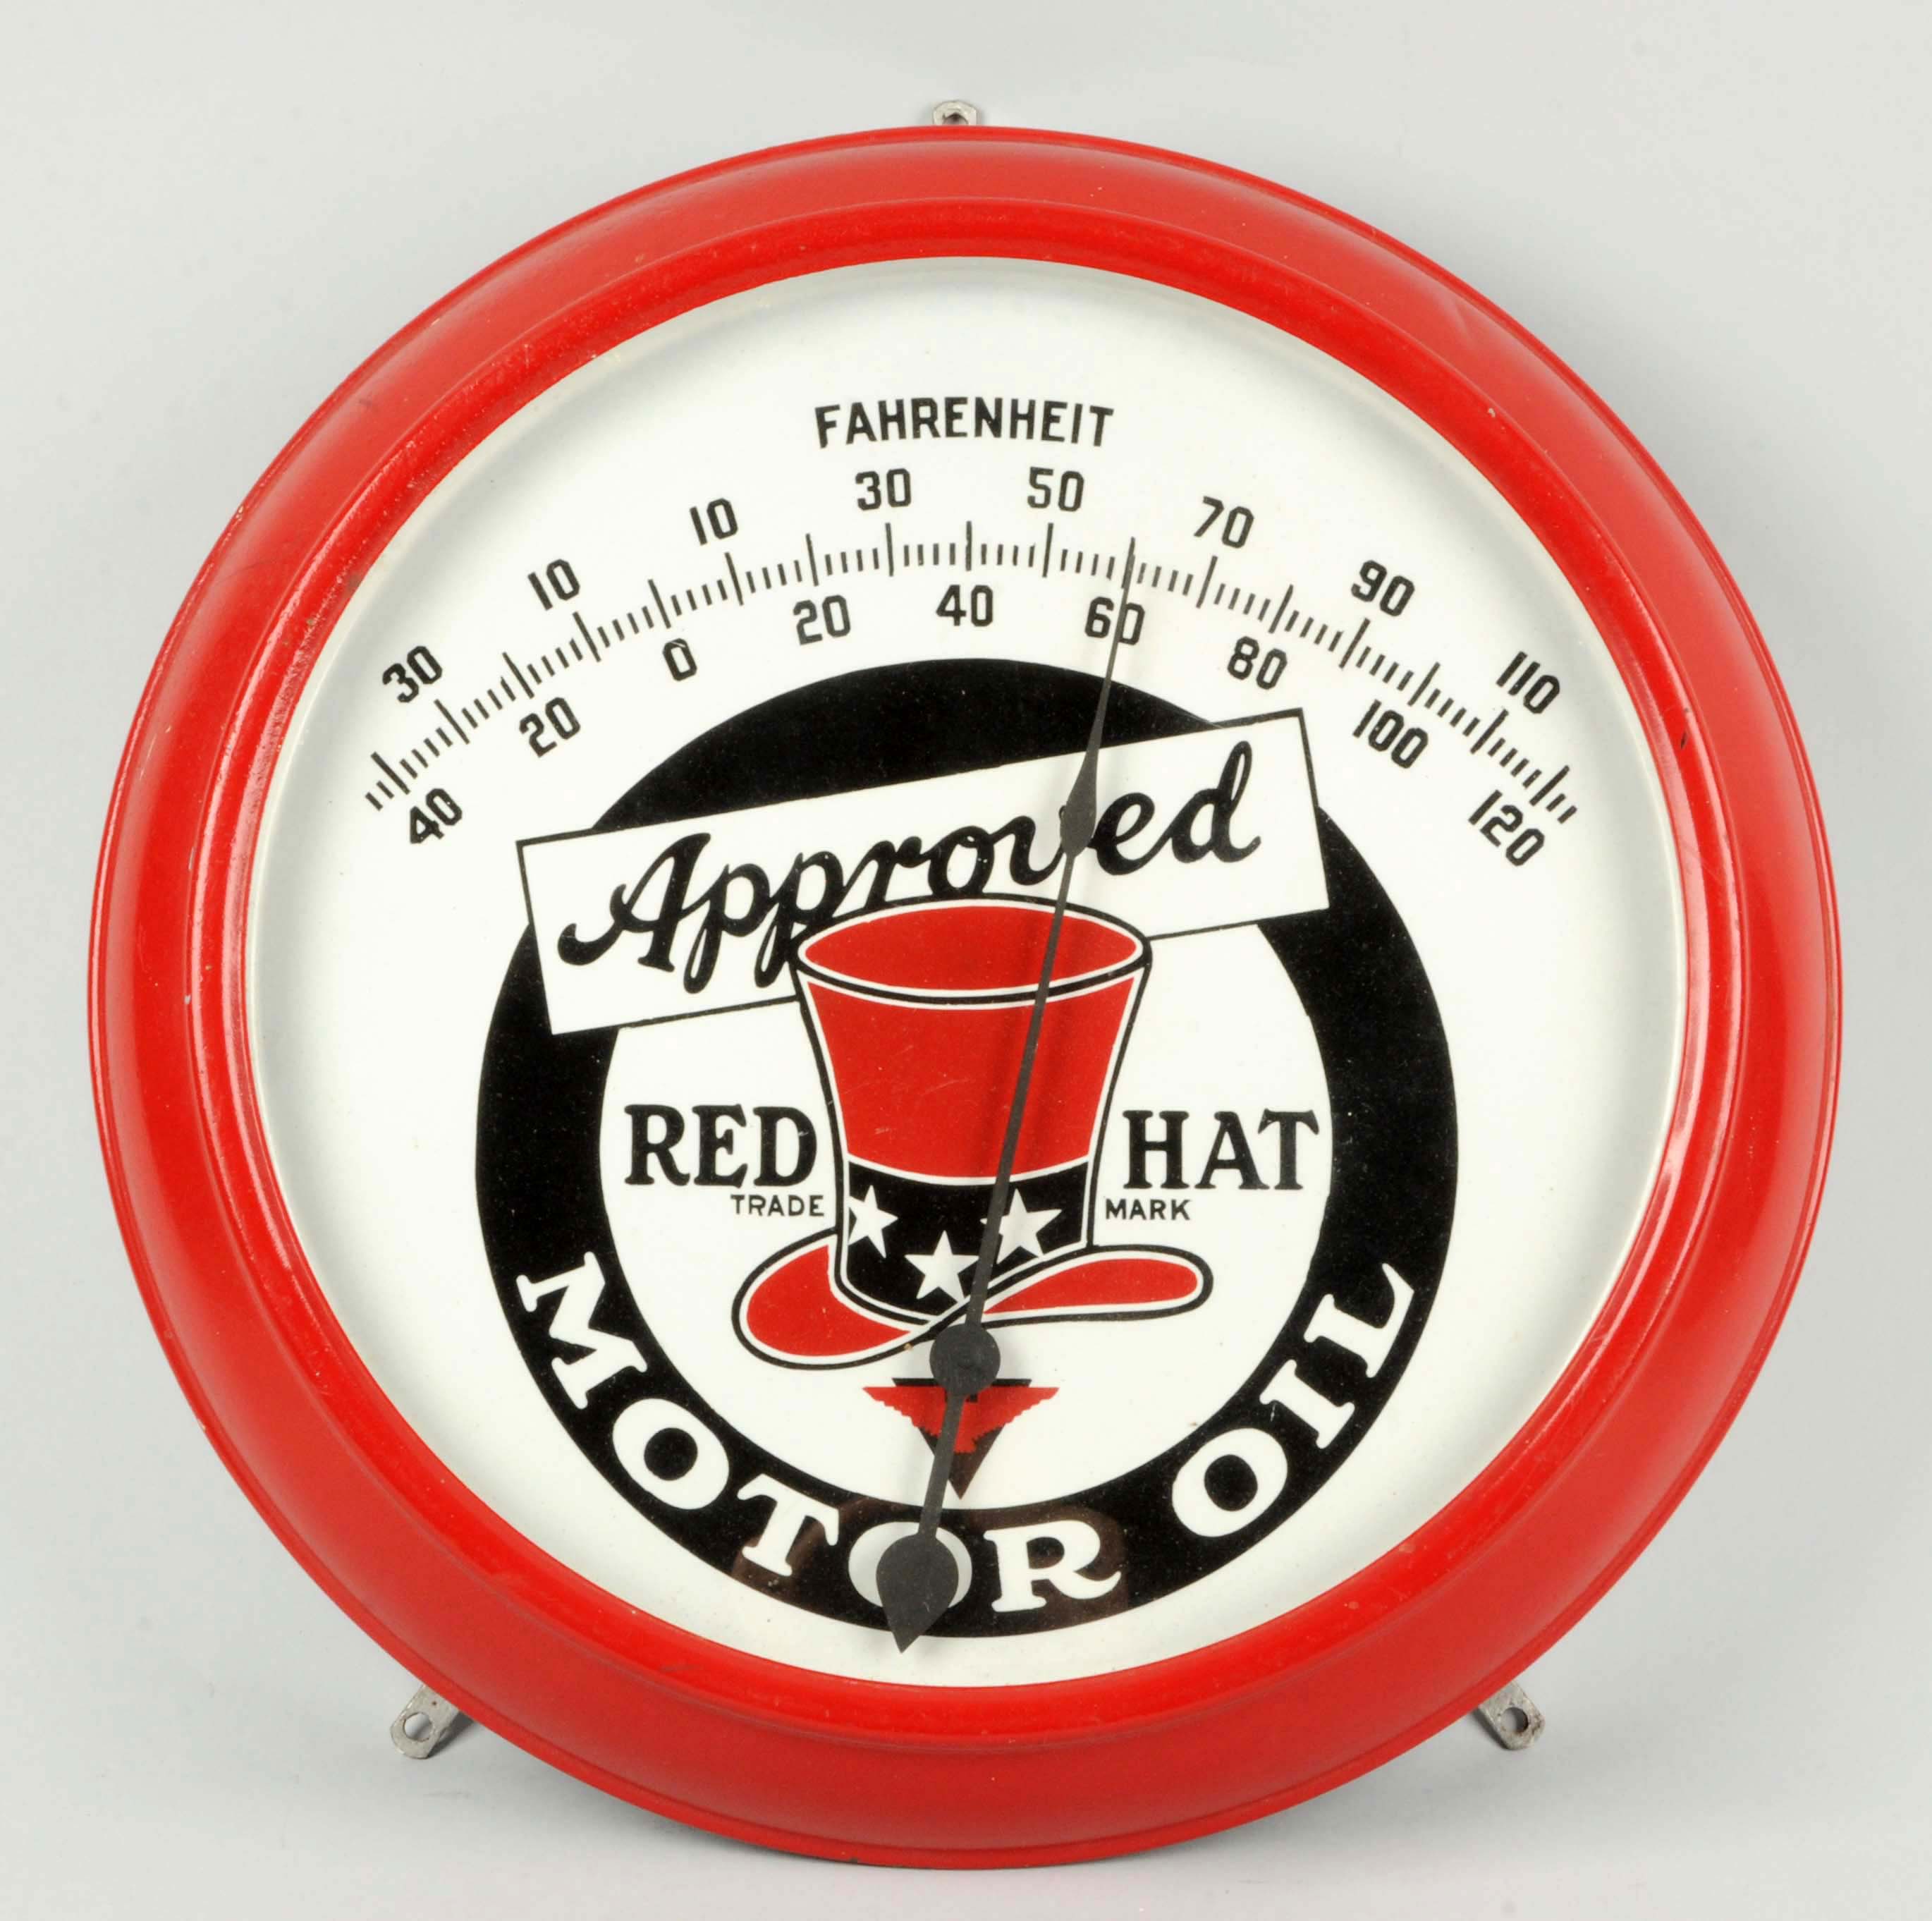 Approved Red Hat Motor Oil Porcelain Thermometer, Estimated at $8,000-12,000.